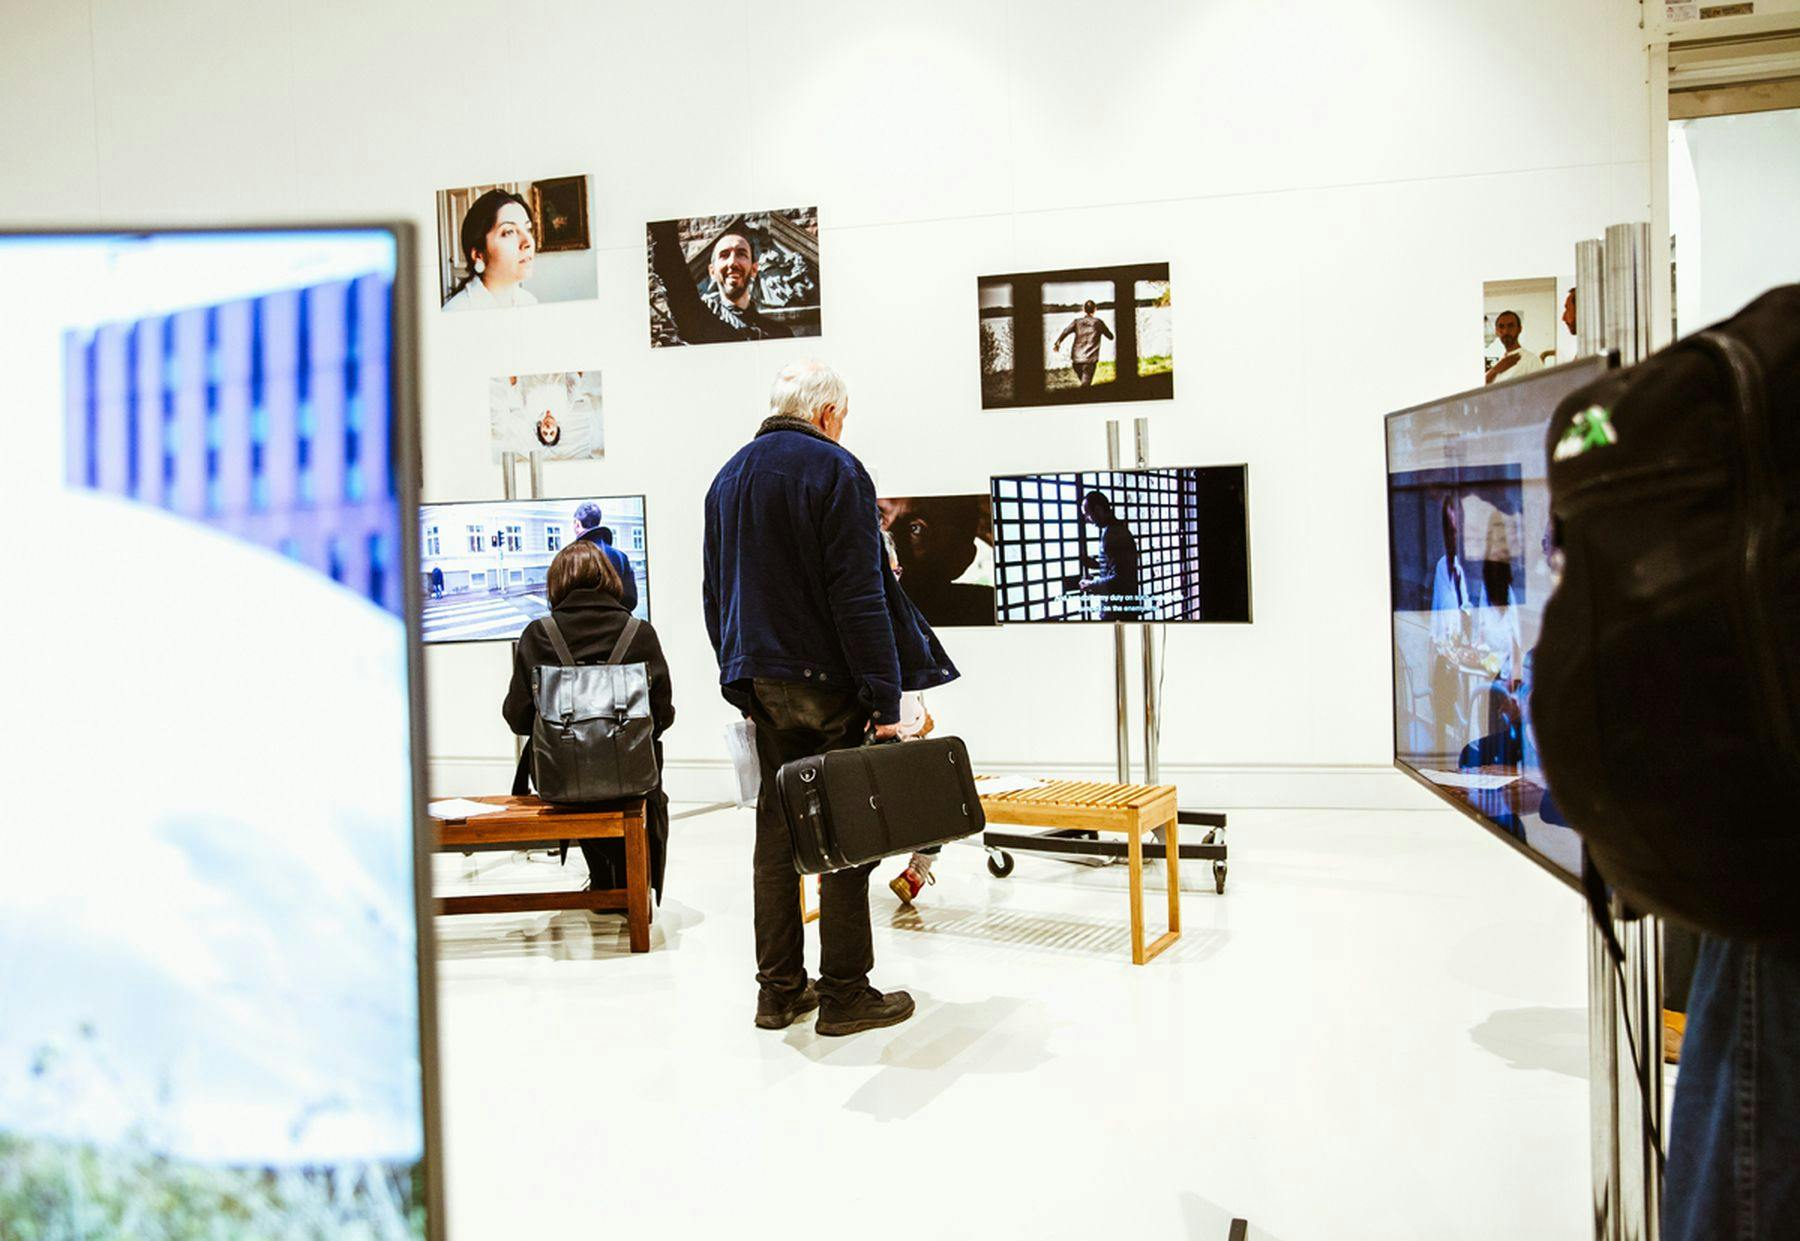 A photograph of people viewing photographs and screens at a gallery.